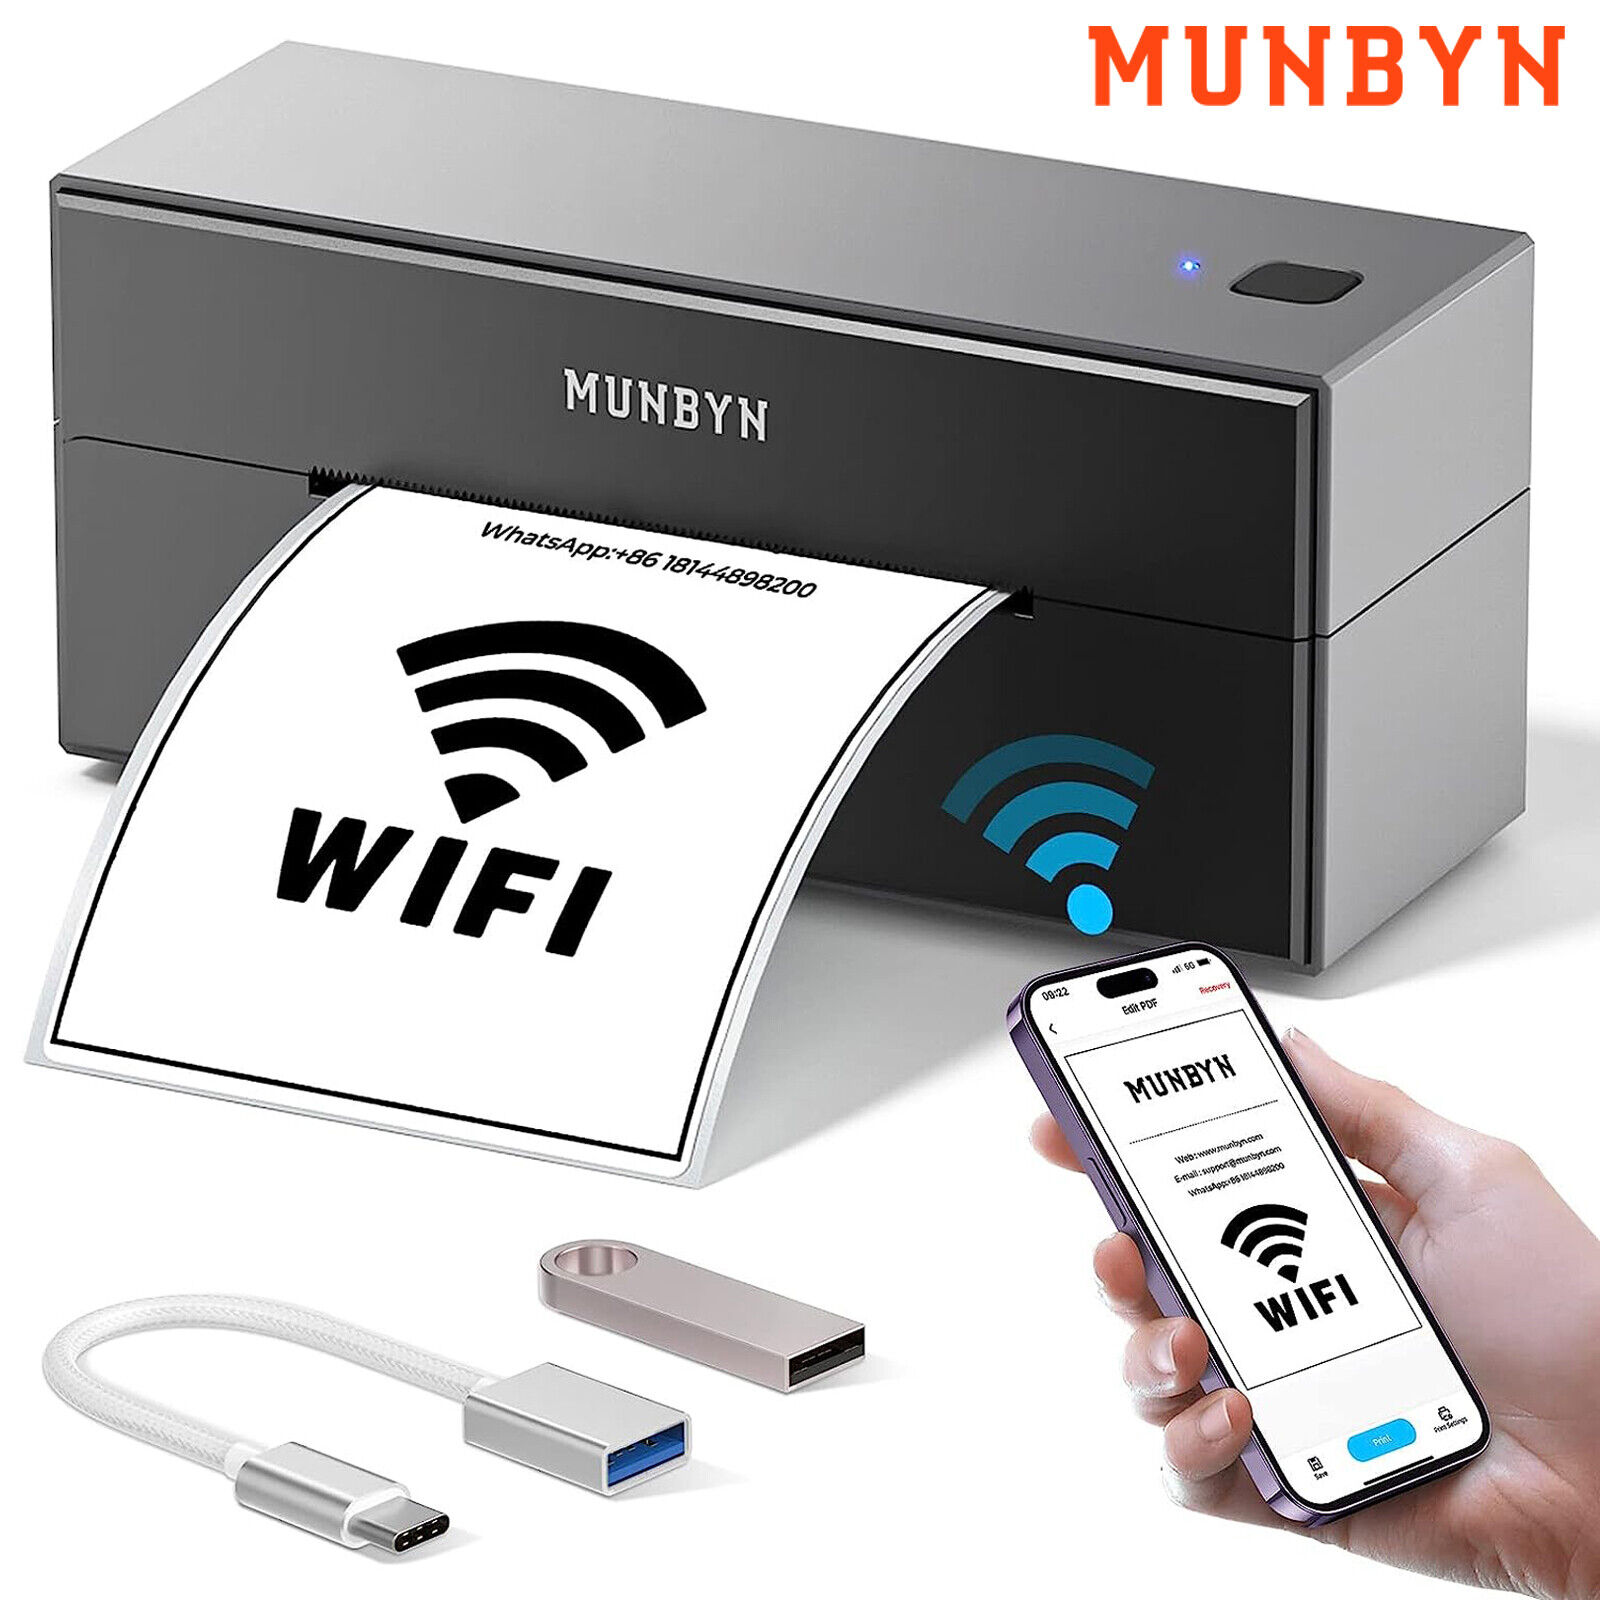 MUNBYN Wi-Fi Thermal Shipping Label Printer True Wireless 4x6 Label for USPS UPS